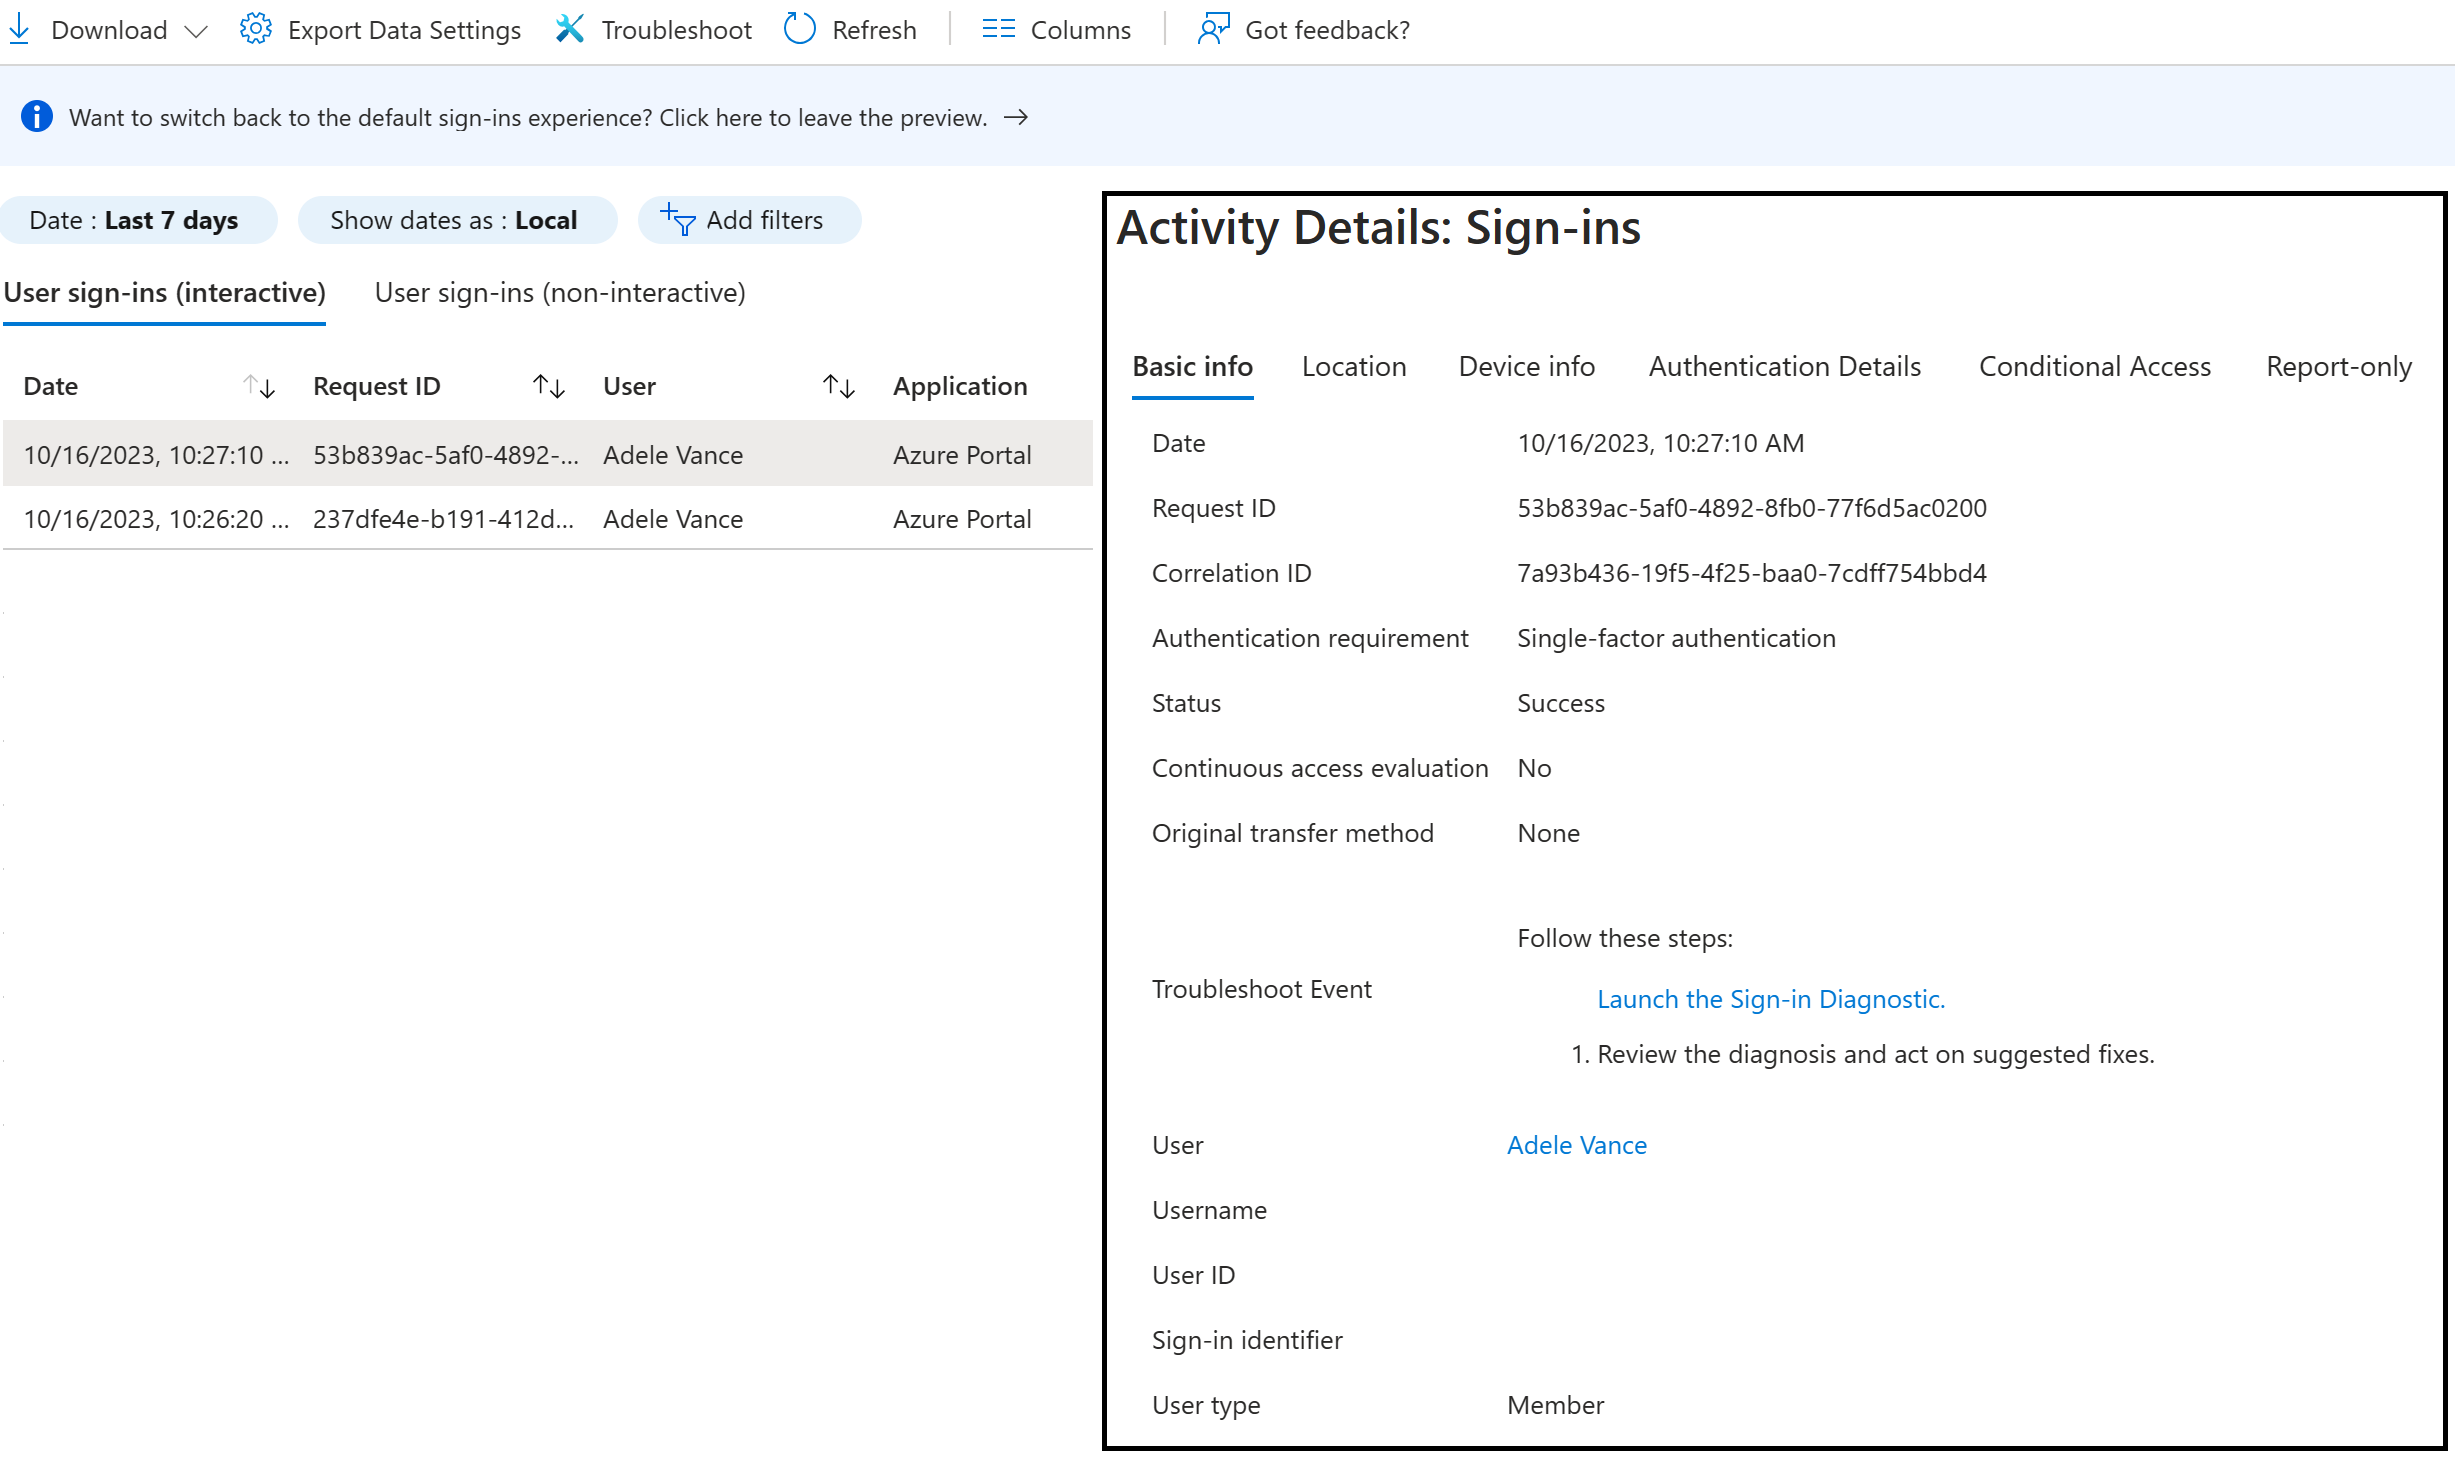 Screenshot shows a detailed information view. Get the details from the report on sign-ins.